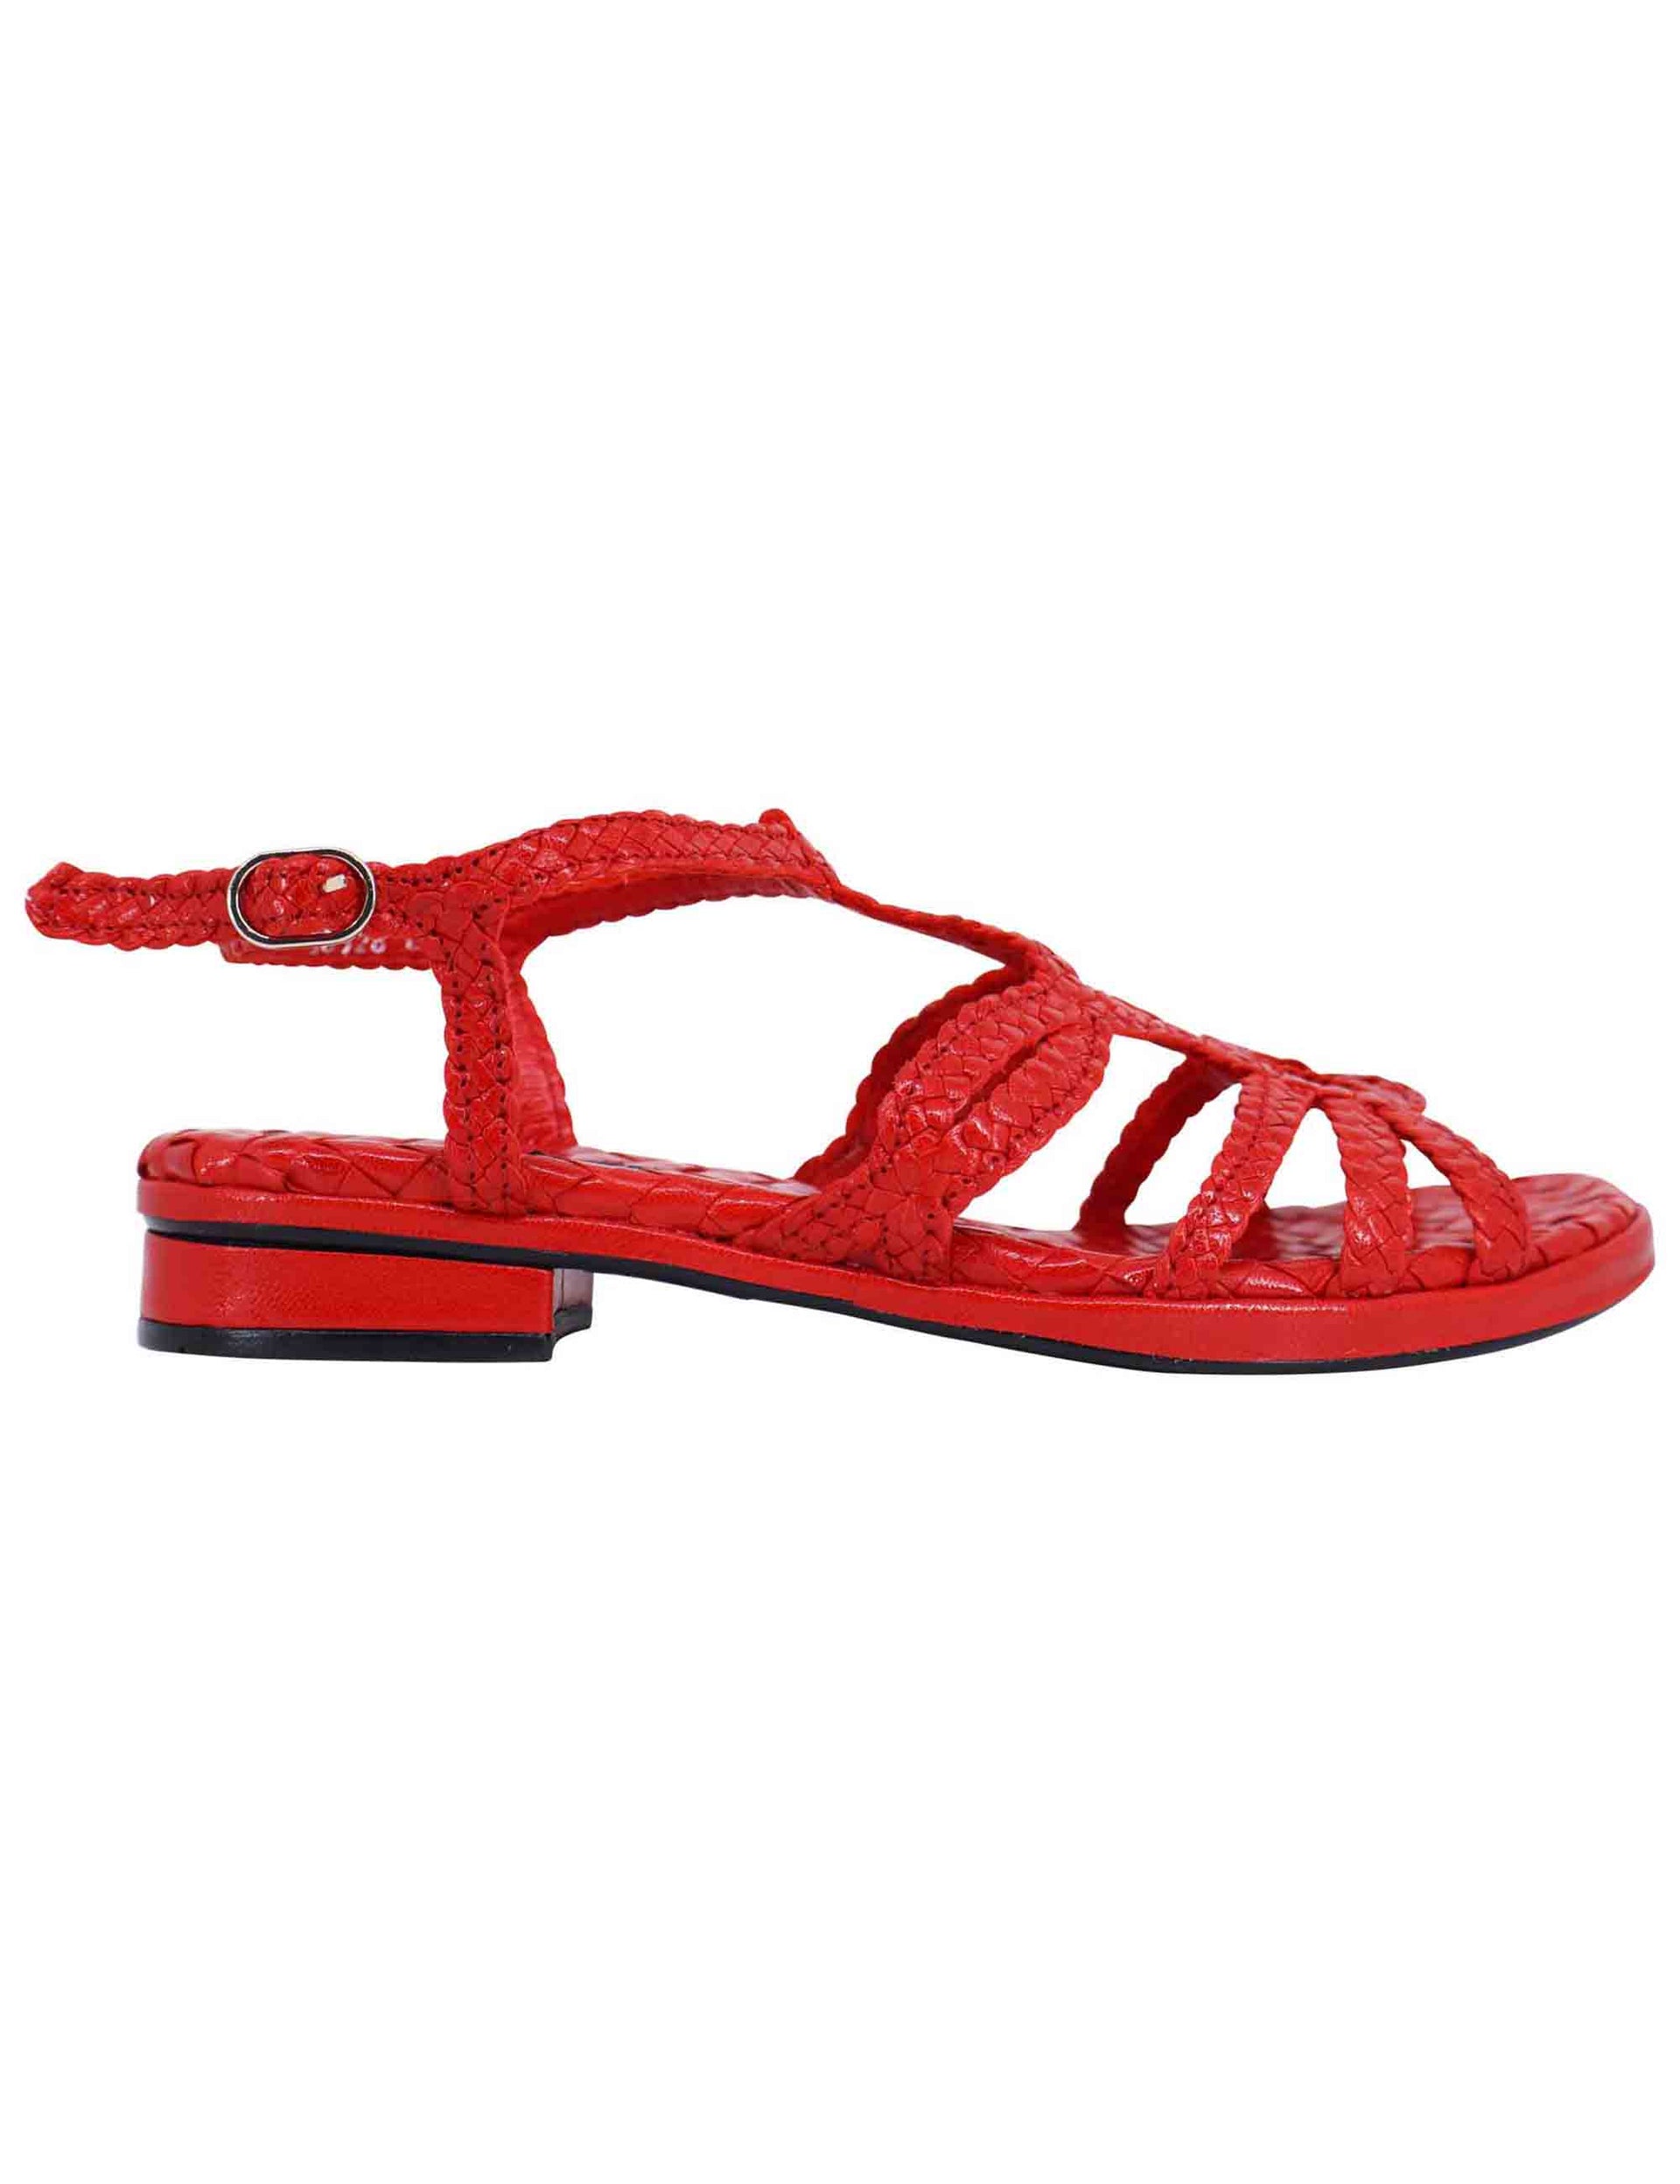 Women's slingback sandals in red woven leather with low heel